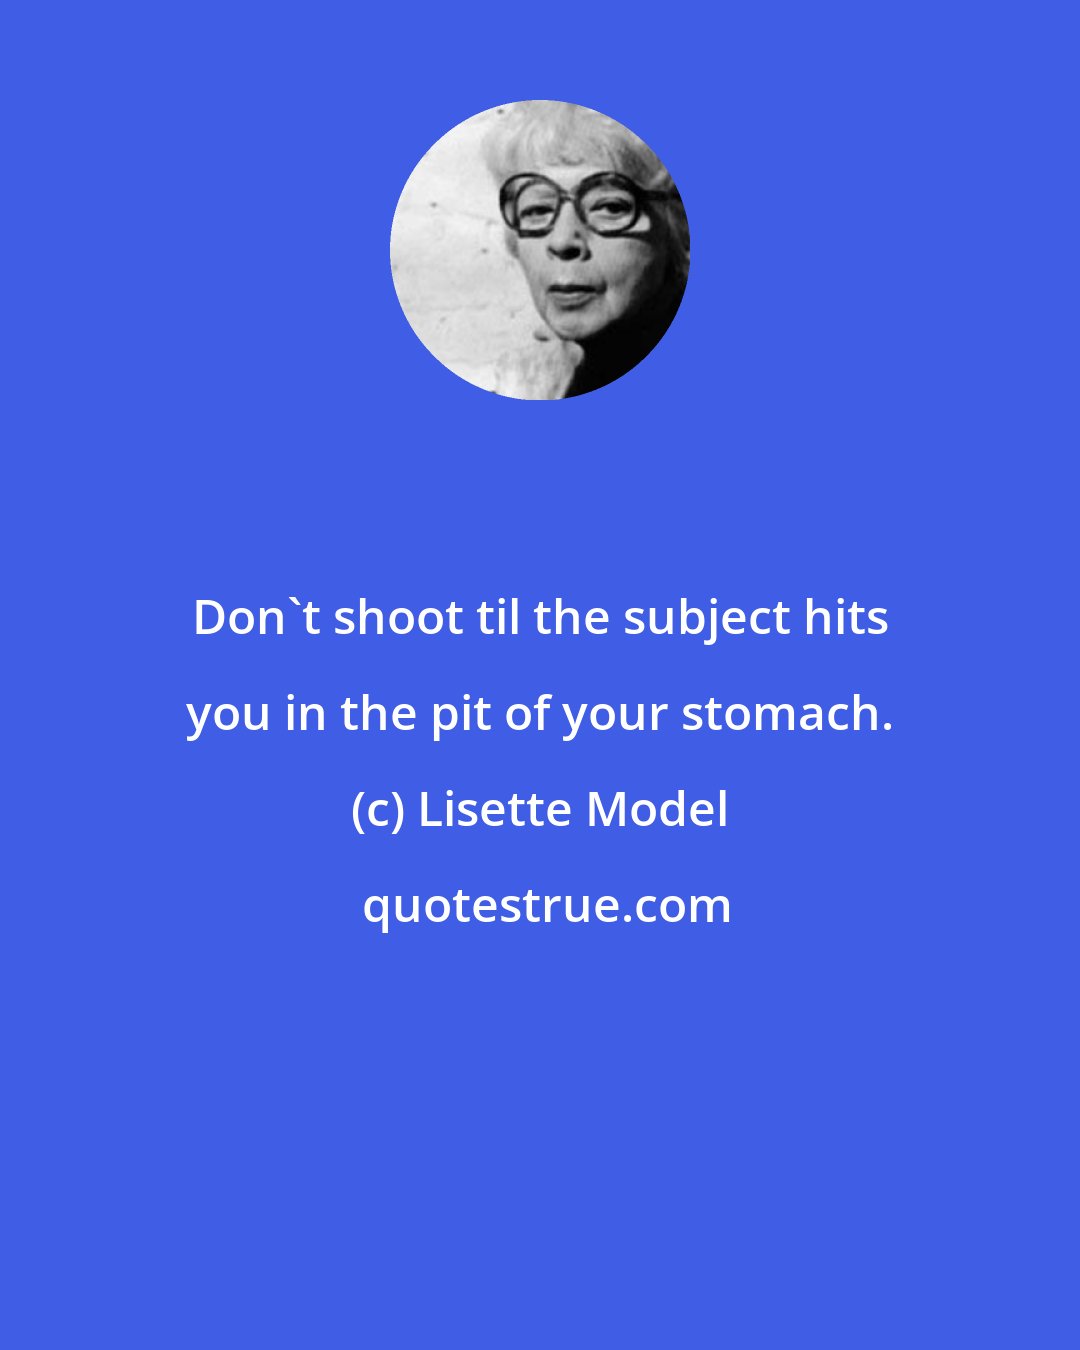 Lisette Model: Don't shoot til the subject hits you in the pit of your stomach.